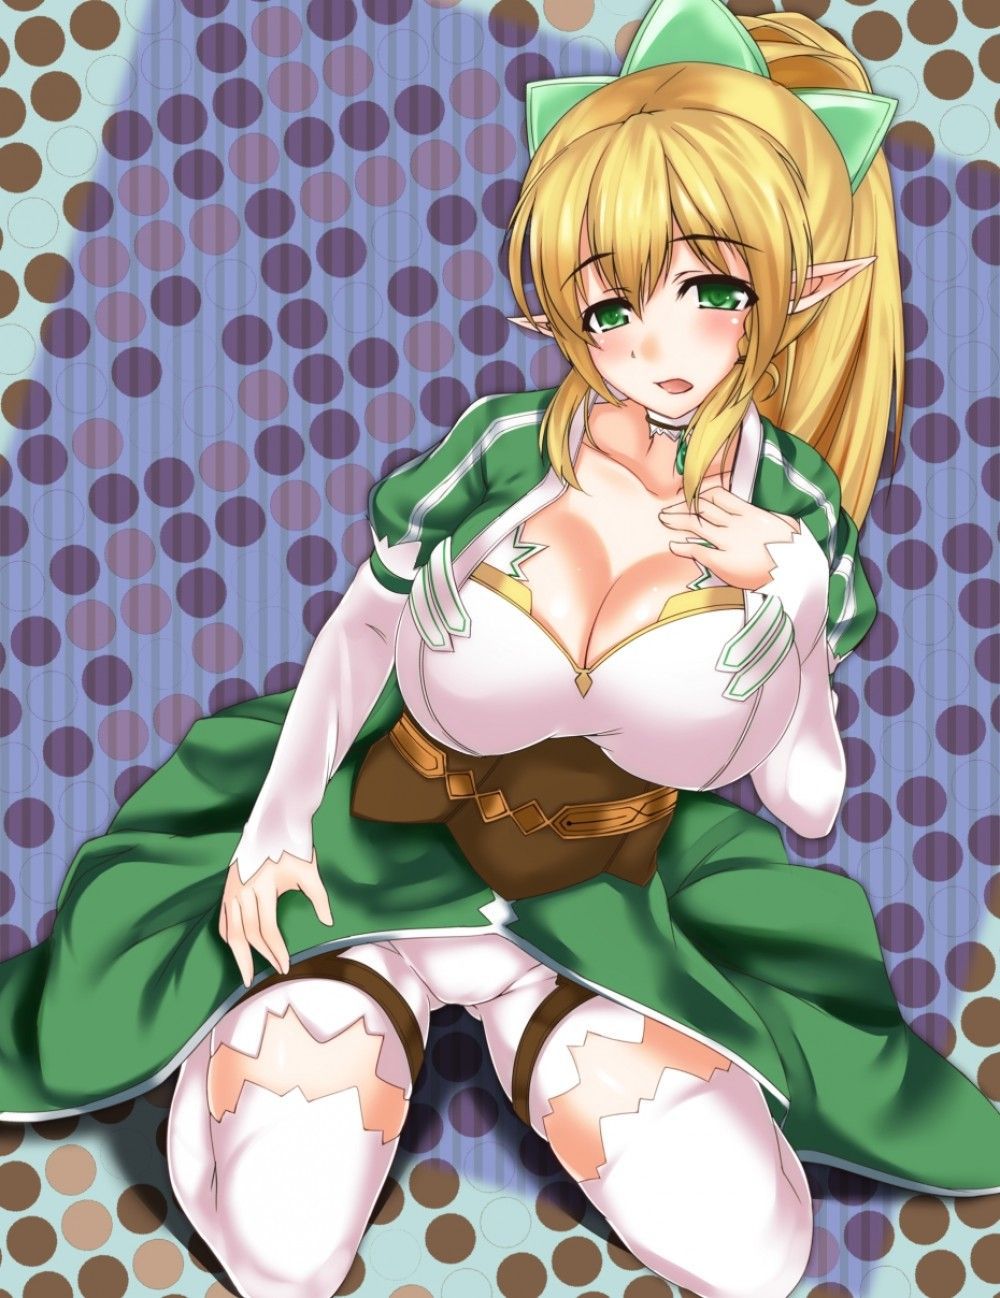 Leafa's Marshmallow big tits and boobs tits online lick with how ww. Sheets挟ndara Dick only worn in disagreeable leafa so cum and I tits together... sword online 6